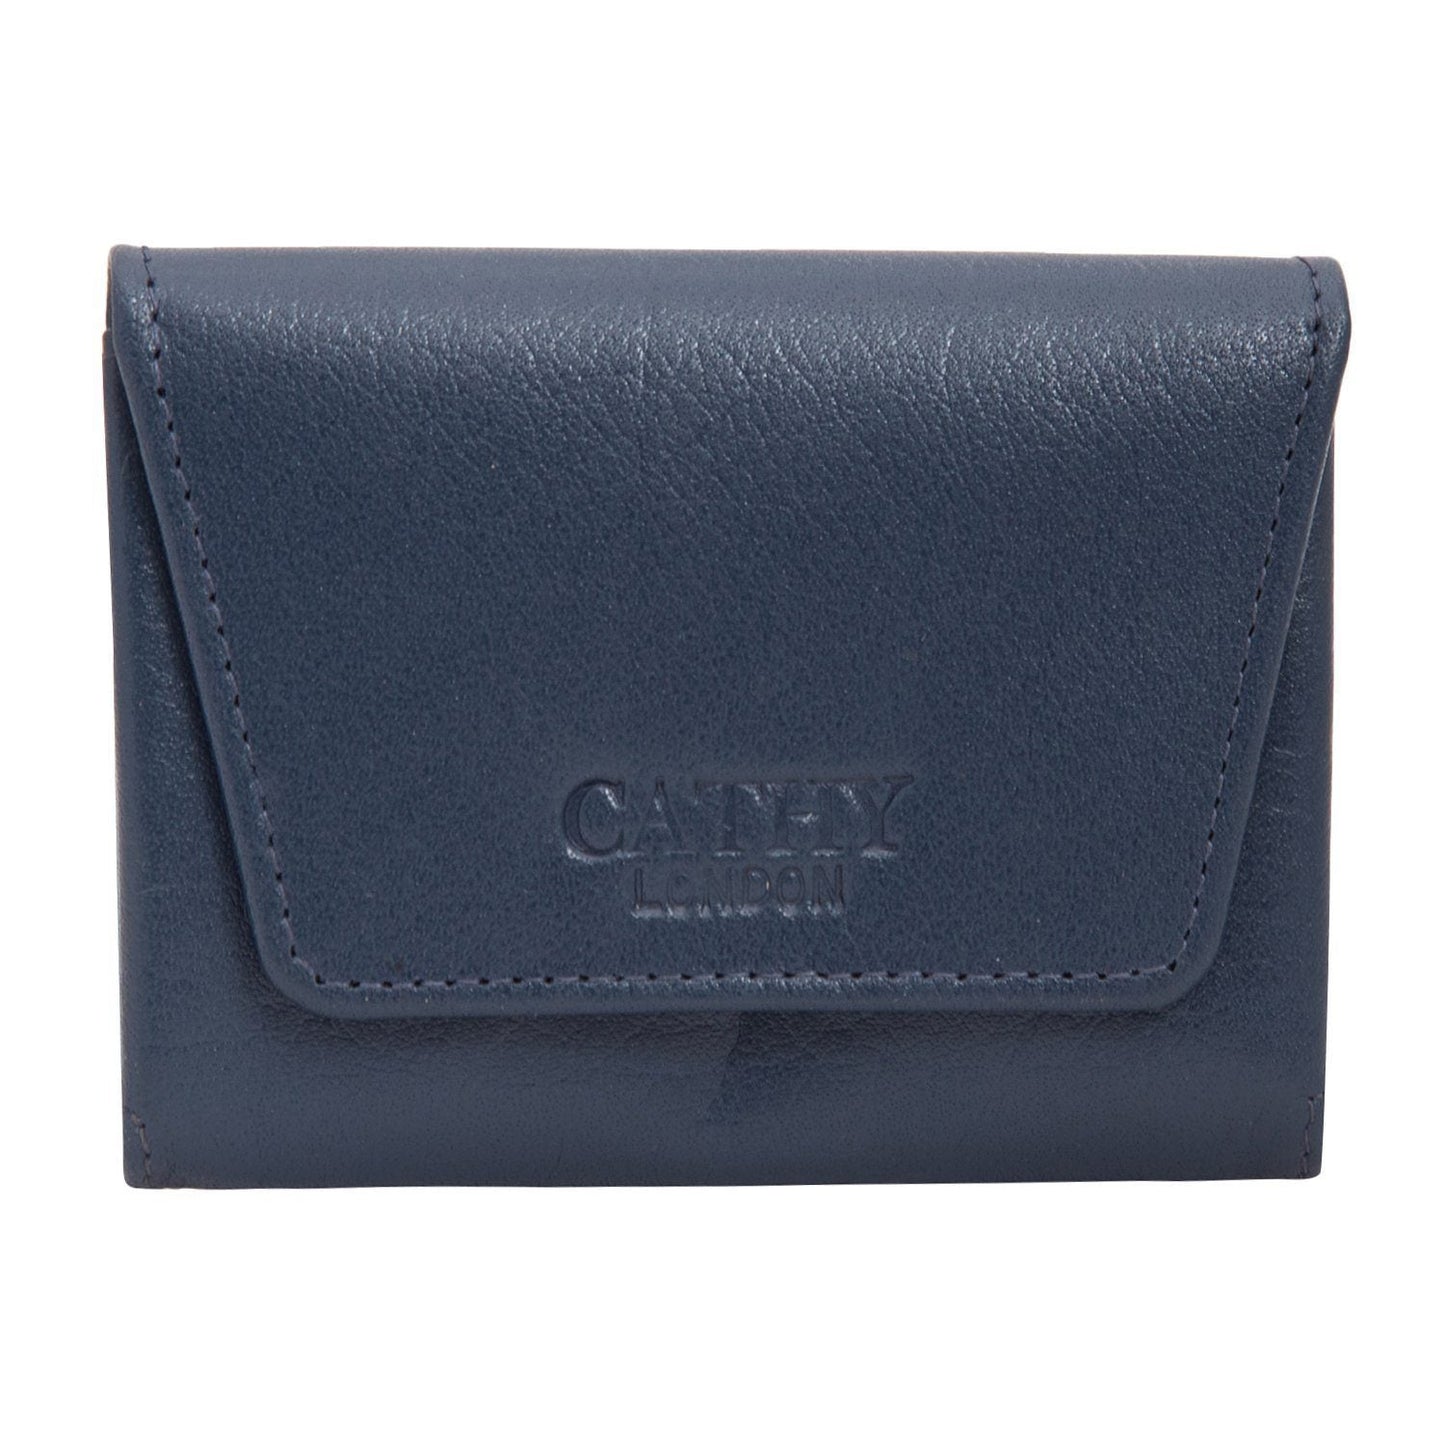 Blue Colour Italian Leather Card Holder/Slim Wallet (Holds Upto 16 Cards) Cathy London 